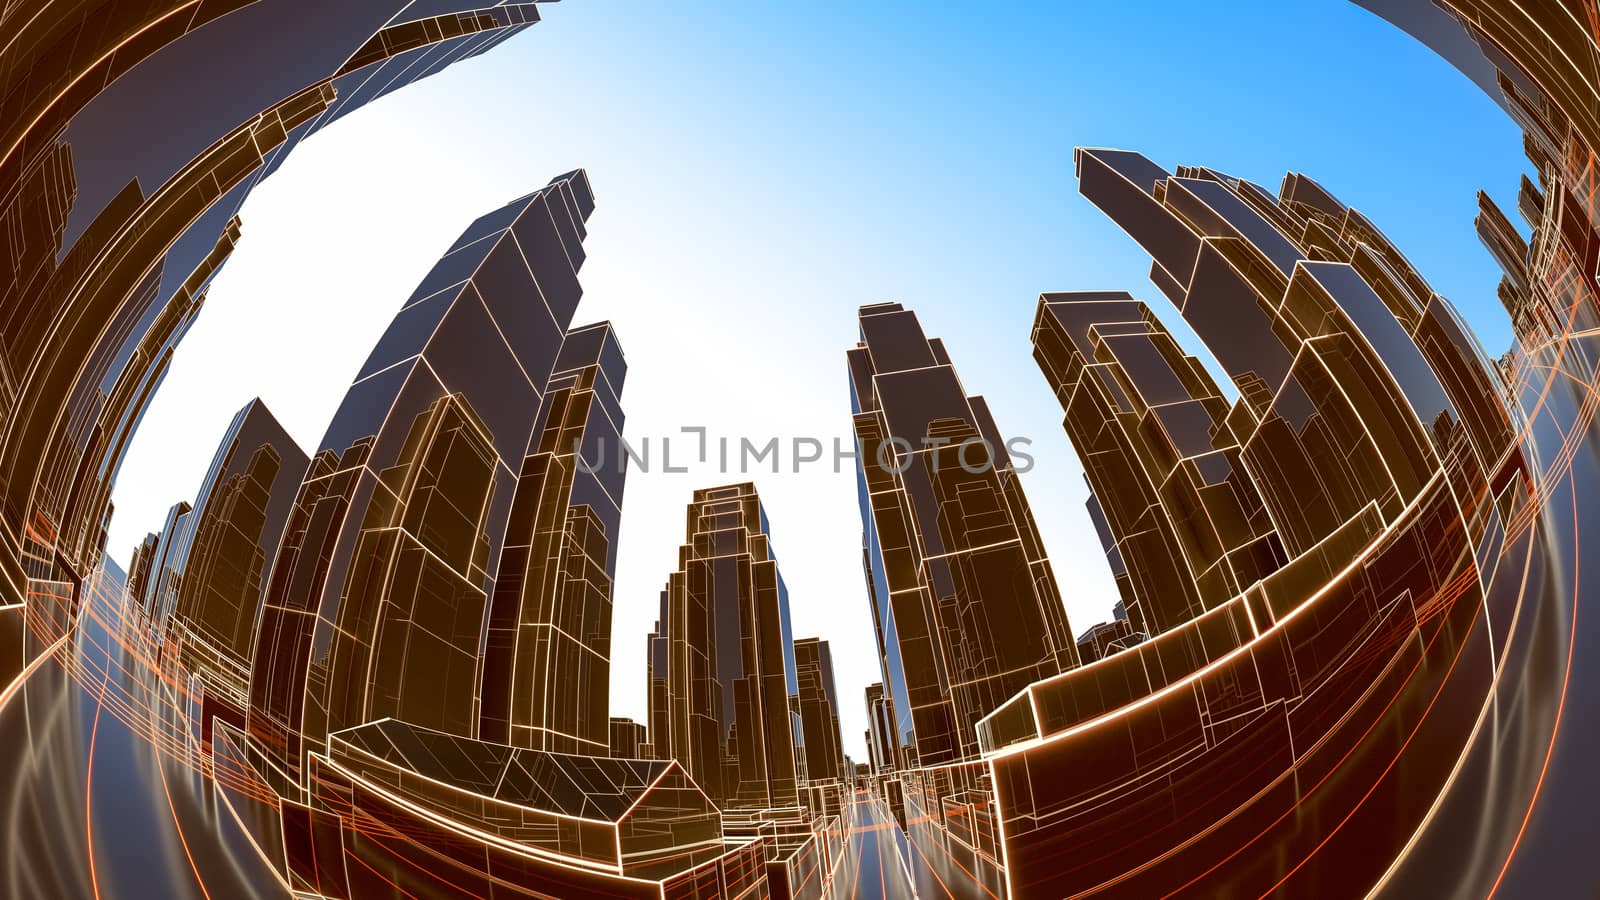 Abstract 3D city with luminous lines and black mirror buildings by cherezoff